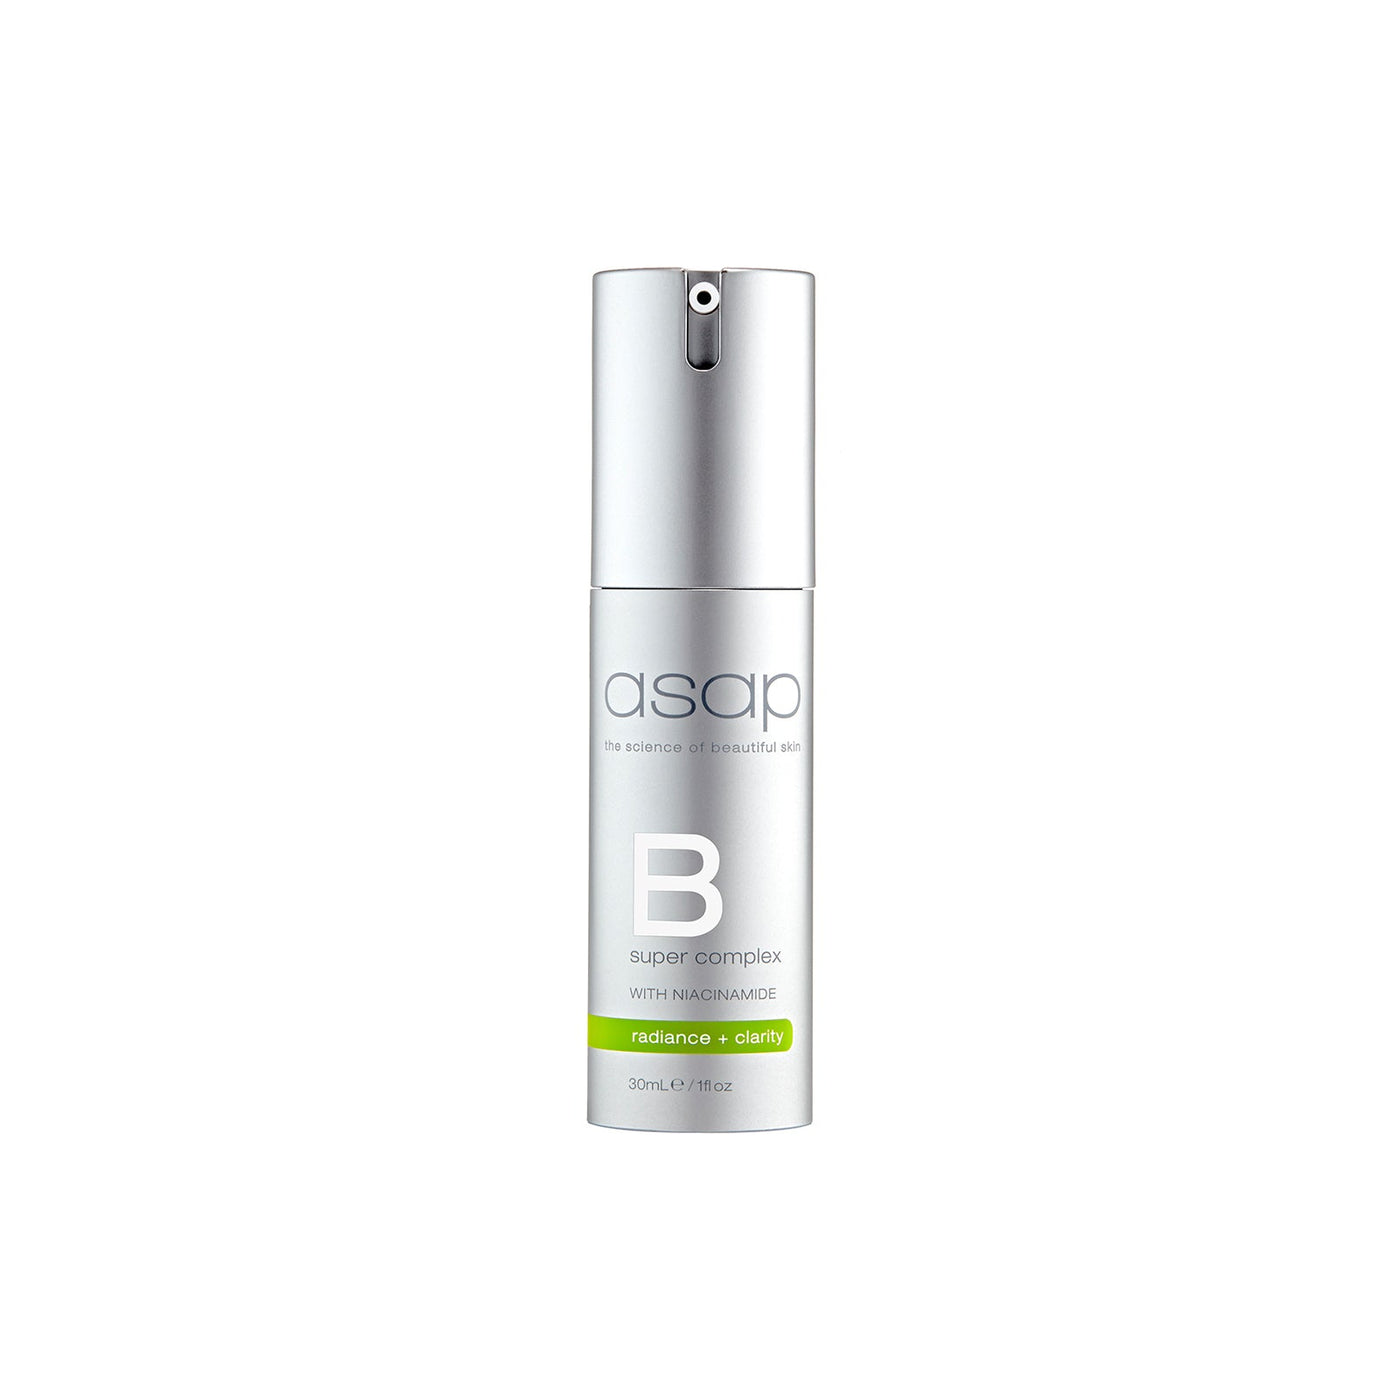 asap Super B Complex (30ml) airless serum  packaging ensures no  wastage of product.  Includes a product level  indicator window